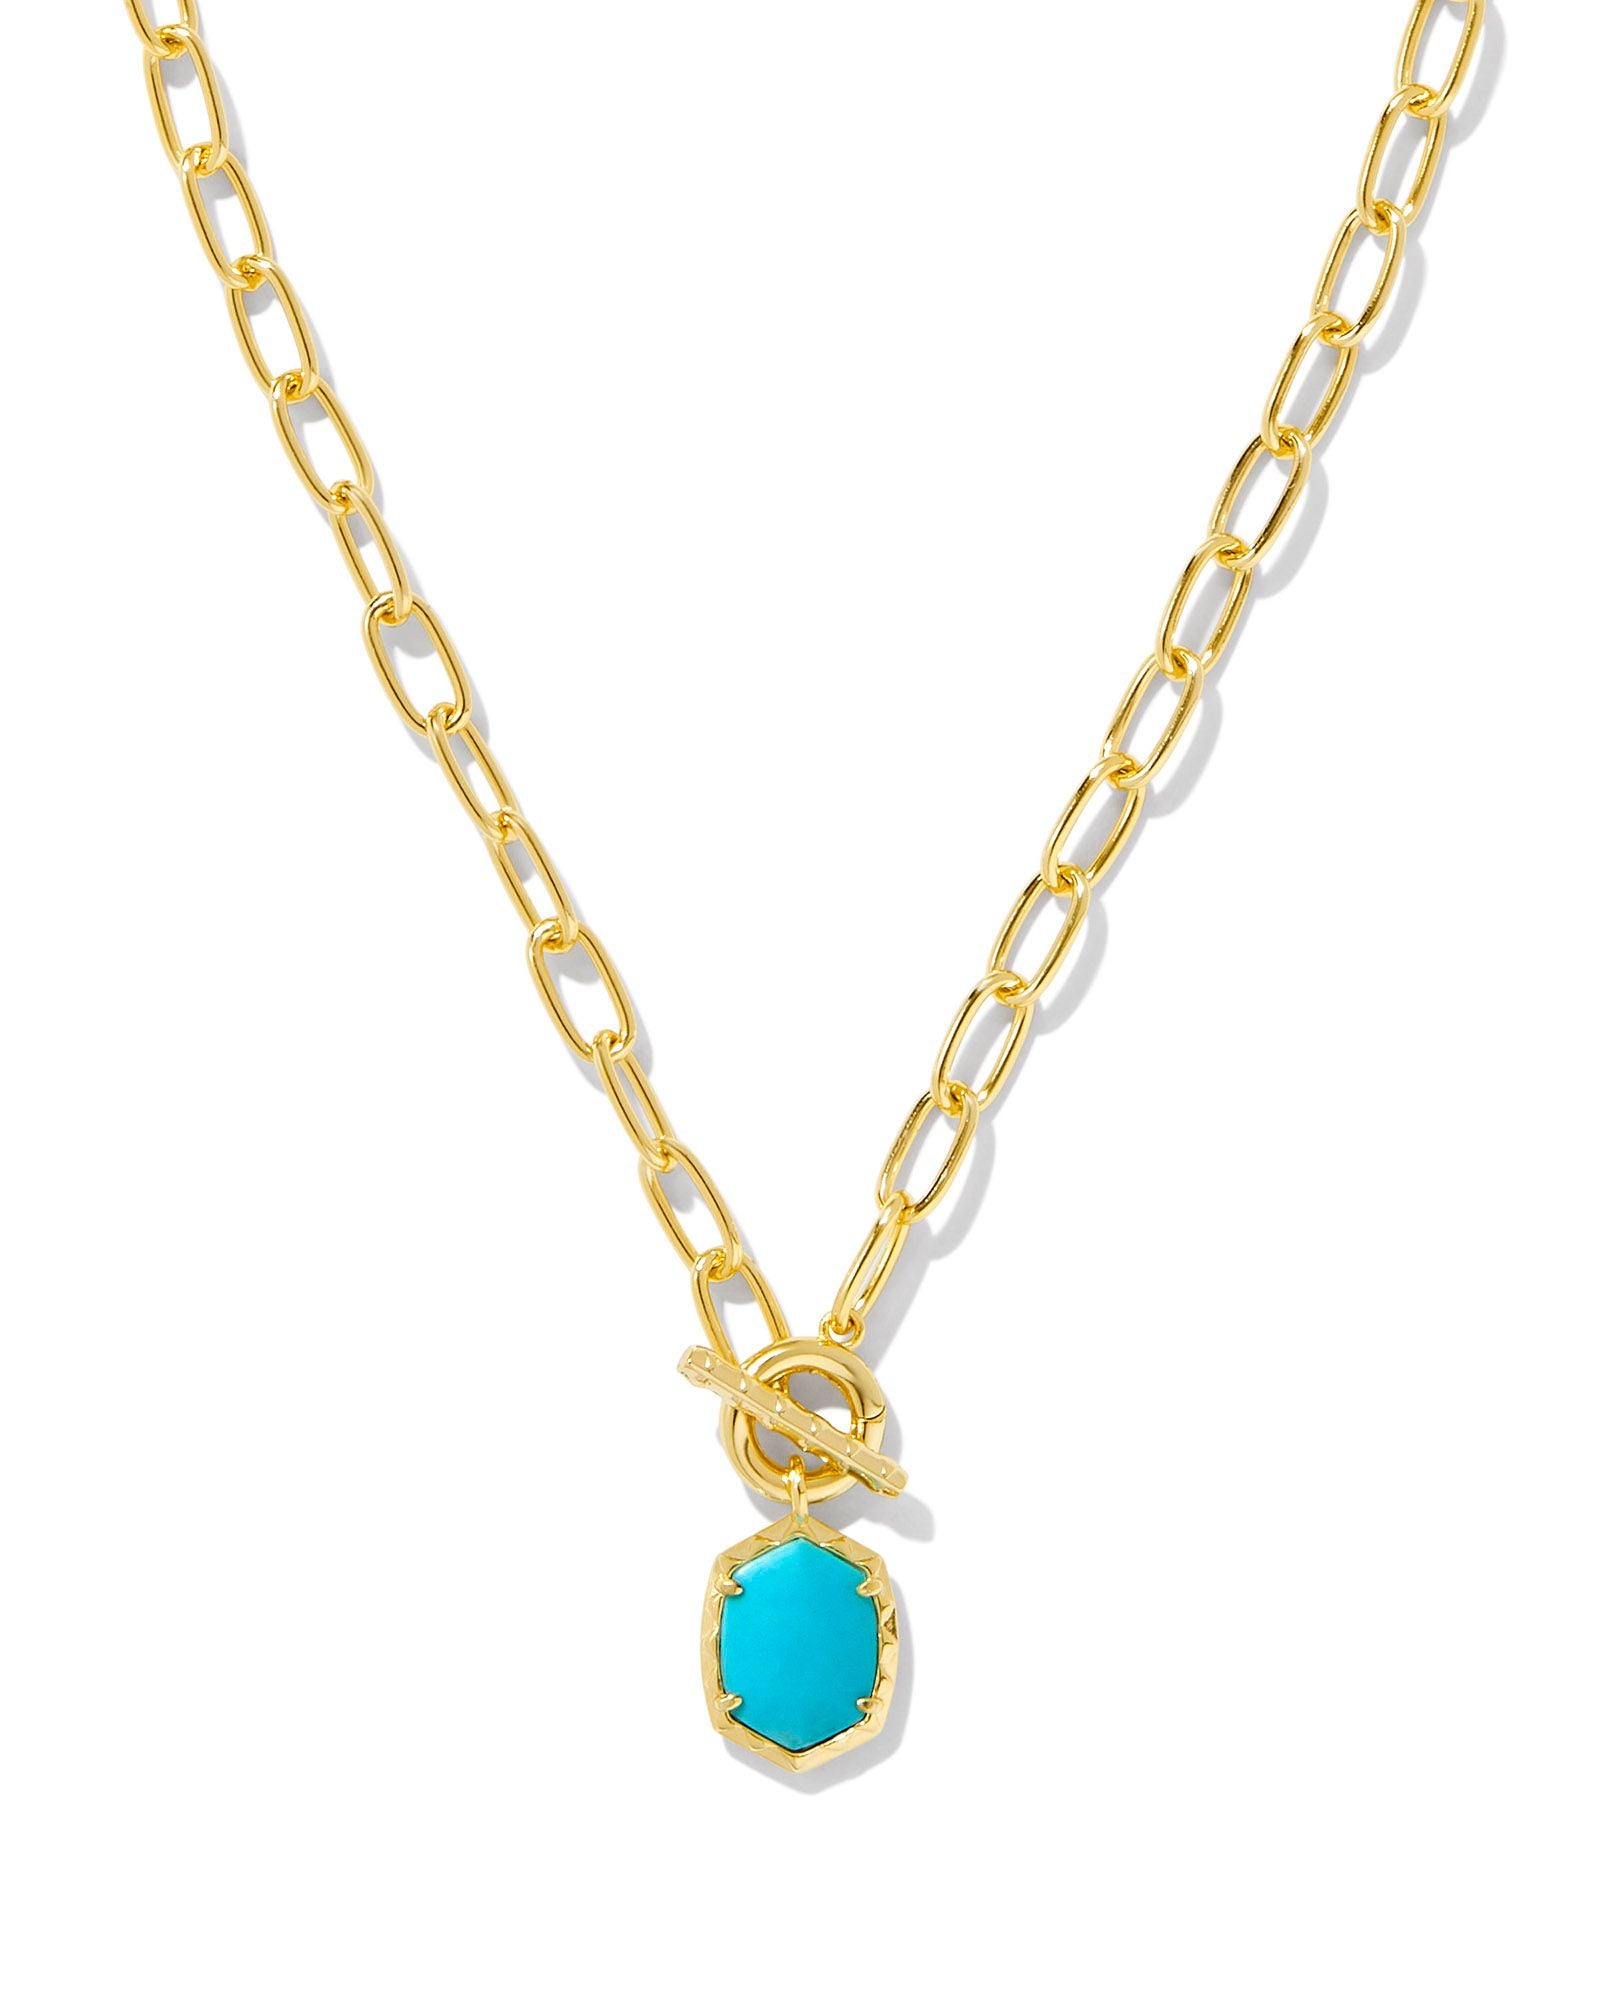 Daphne Convertible Gold Link and Chain Necklace in Variegated Turquoise Magnesite